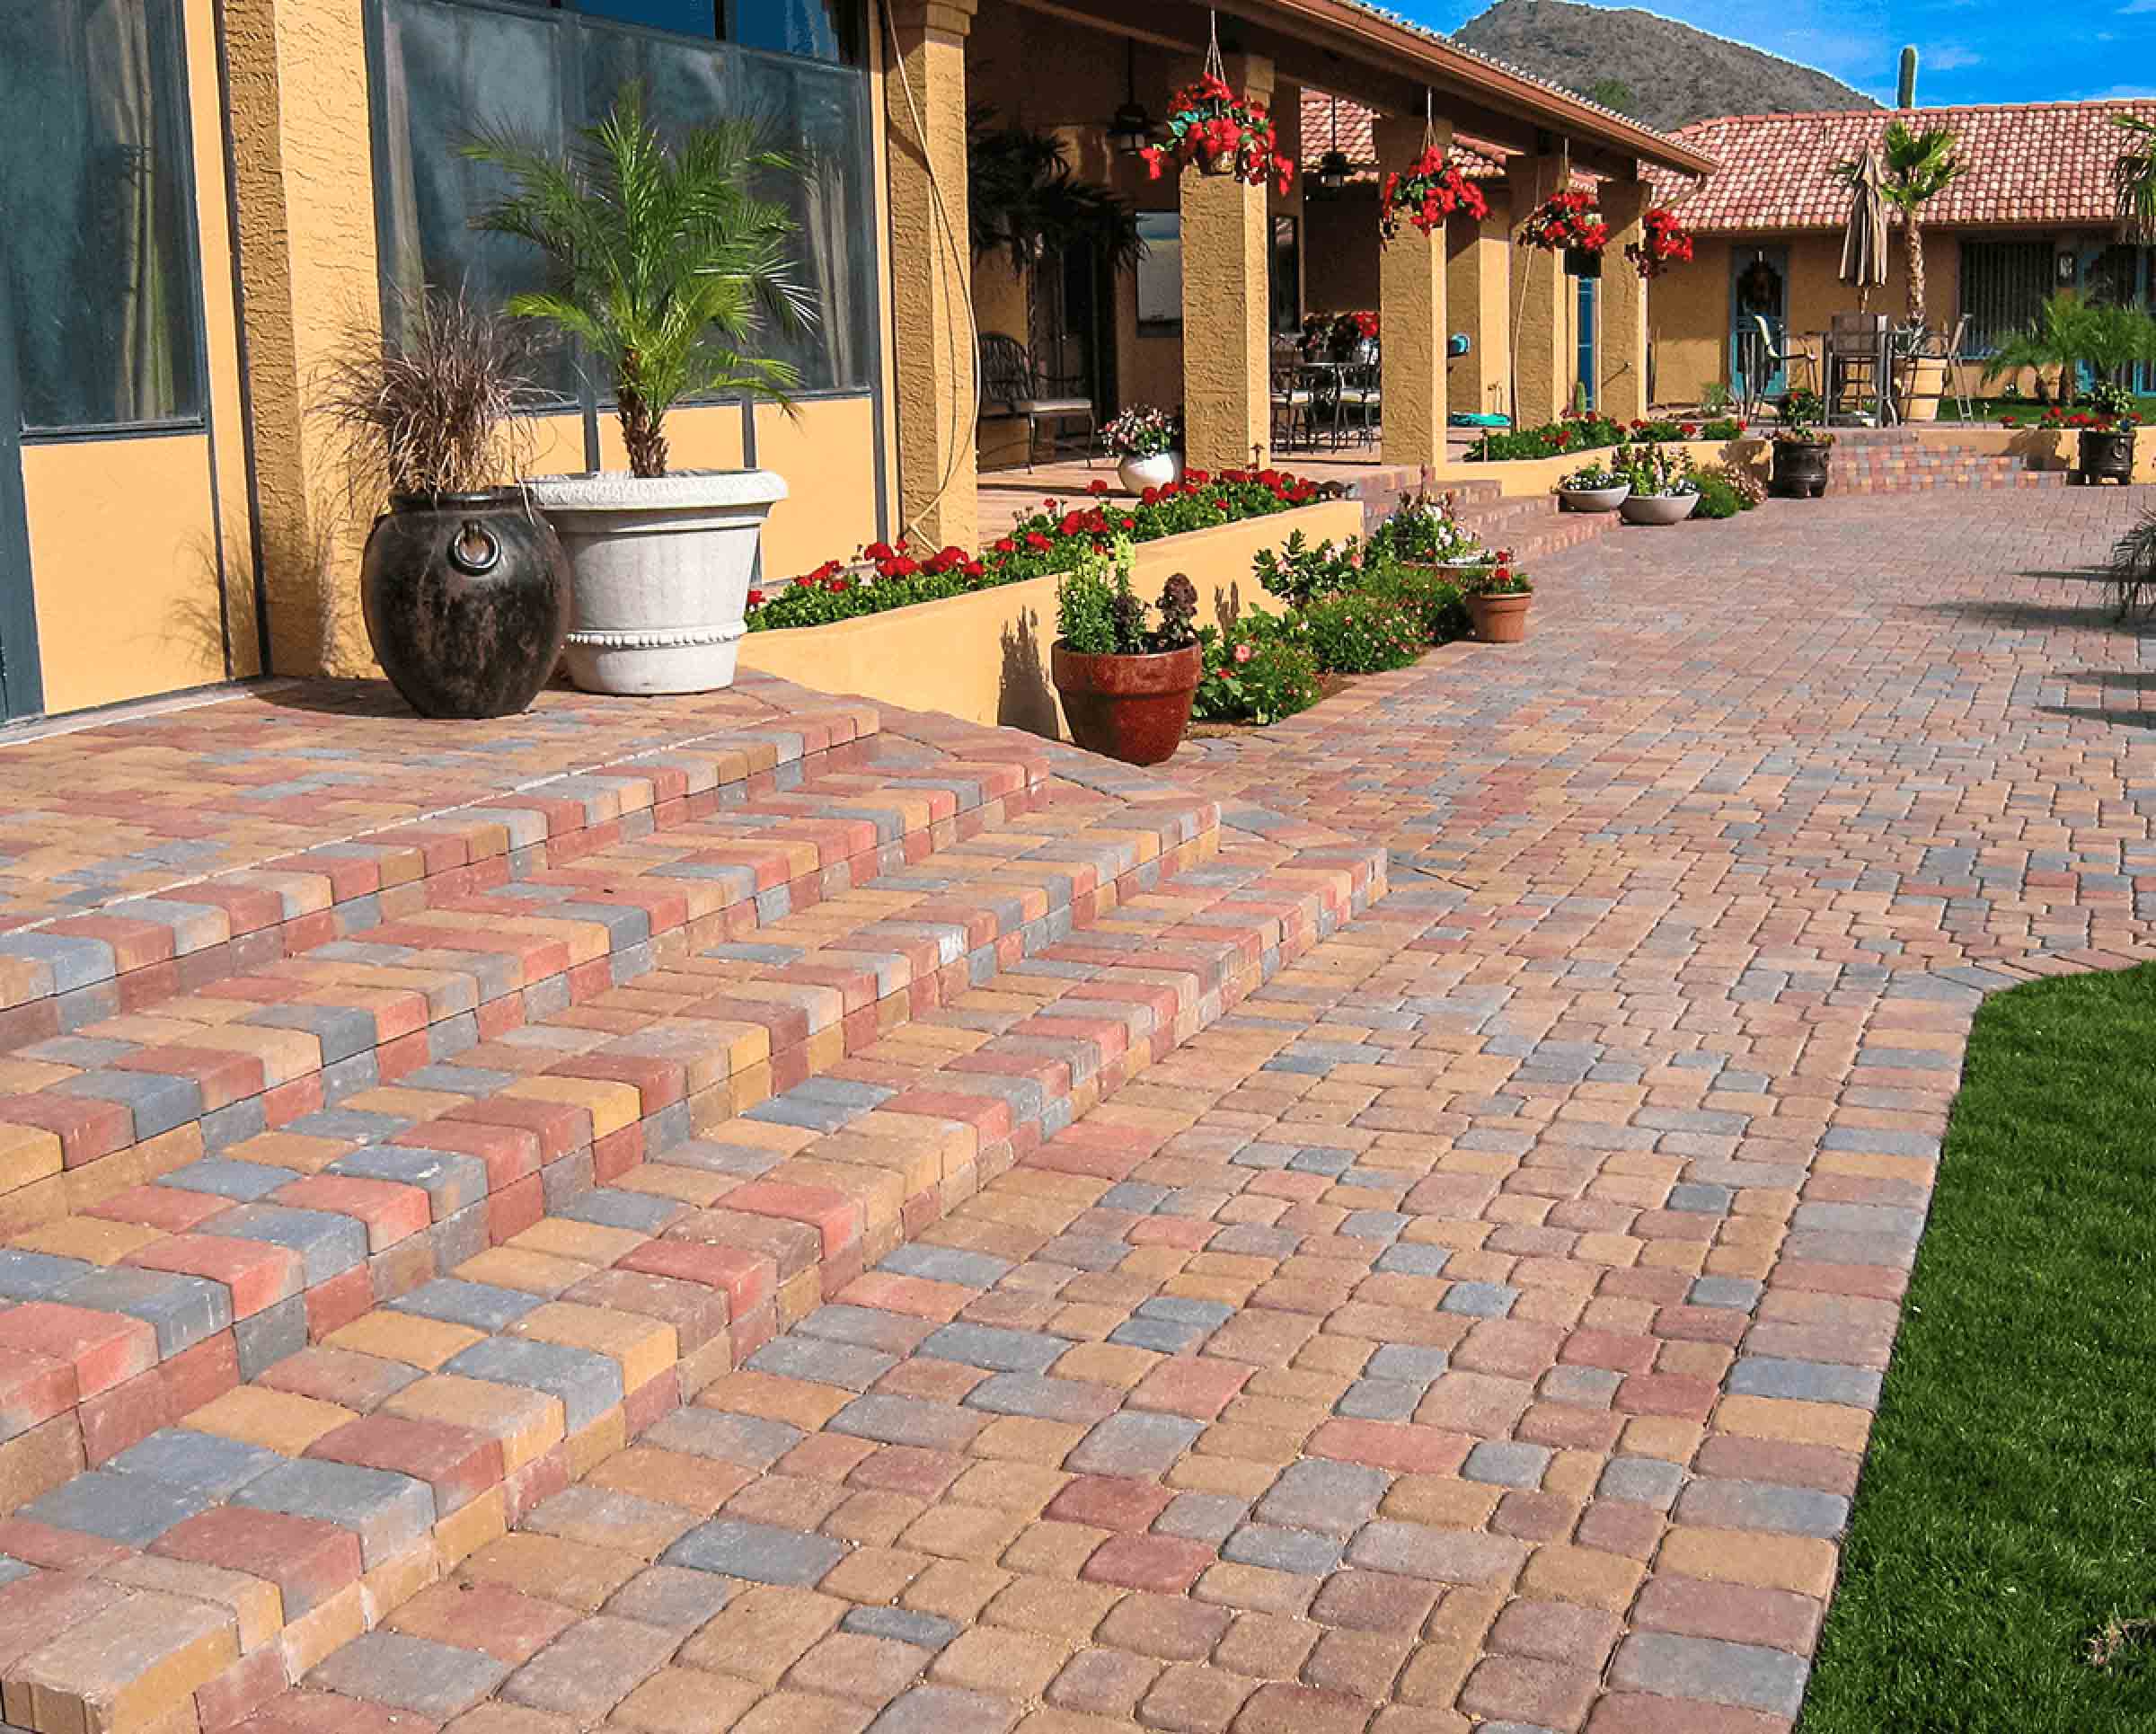 How to Choose a Pavers Company: 5 Things to Consider · Seal 'n Lock